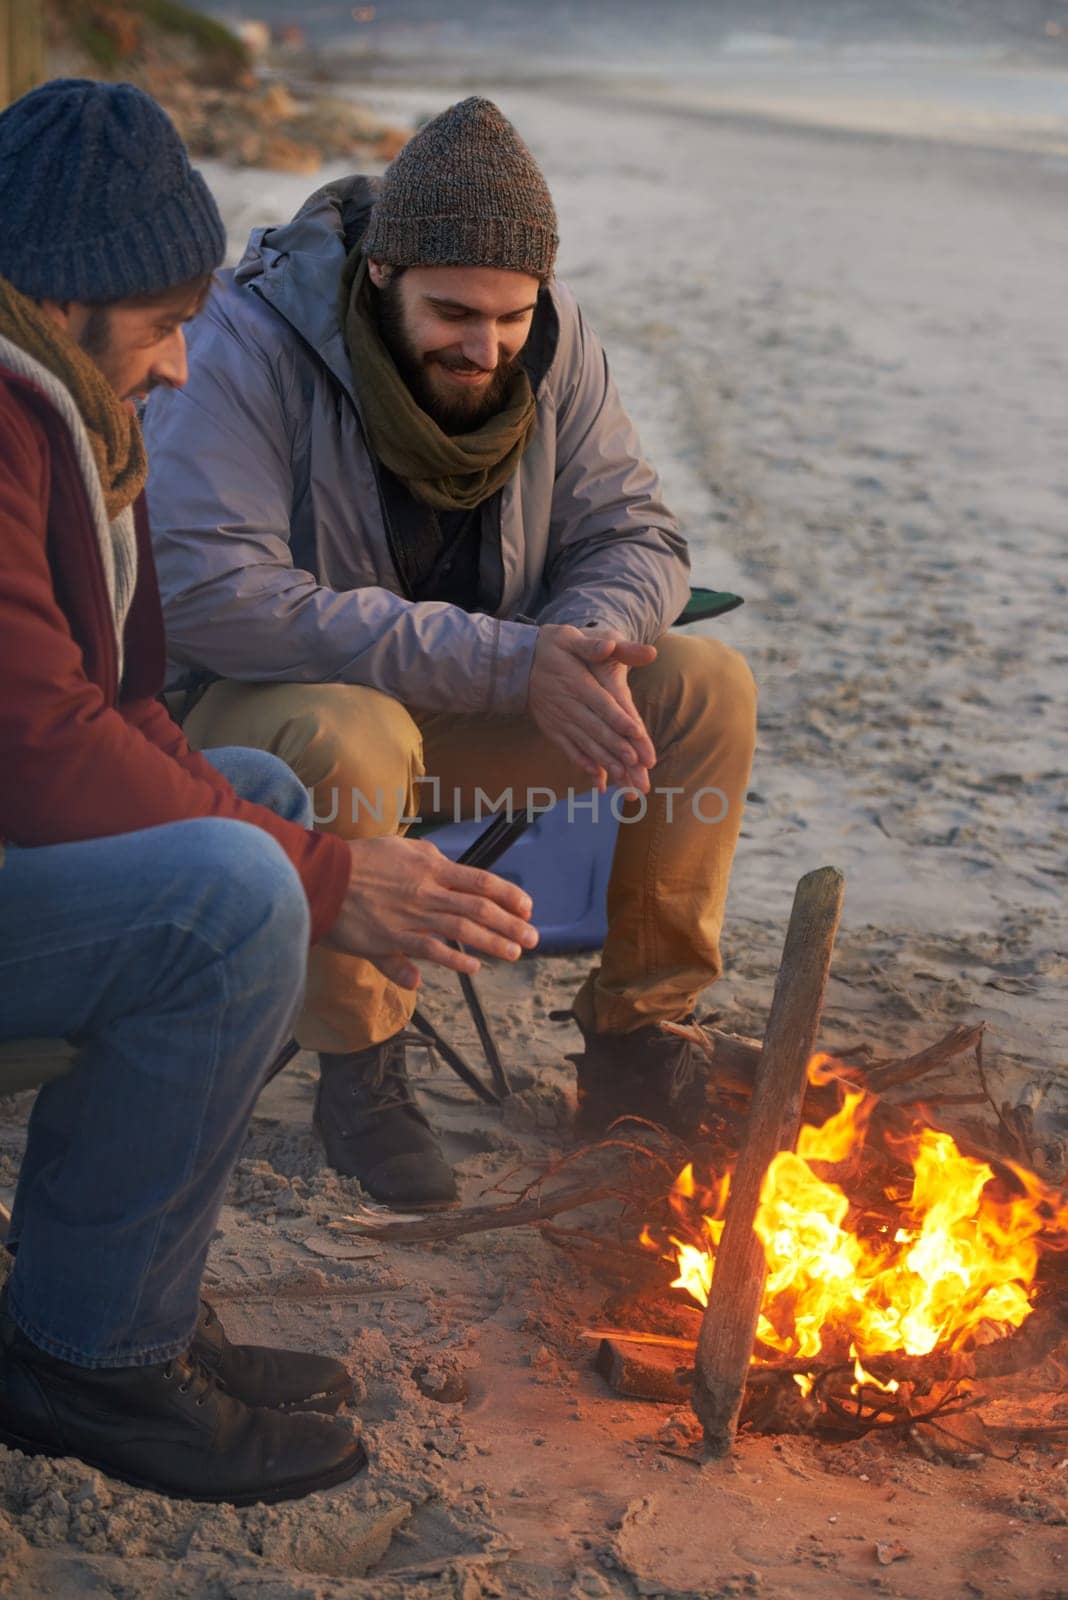 Men, sunset and campfire with cold hands, smile and happy from travel adventure and journey outdoor. Friends, ocean and sea with bonding, nature and vacation by a beach together on holiday with fire.